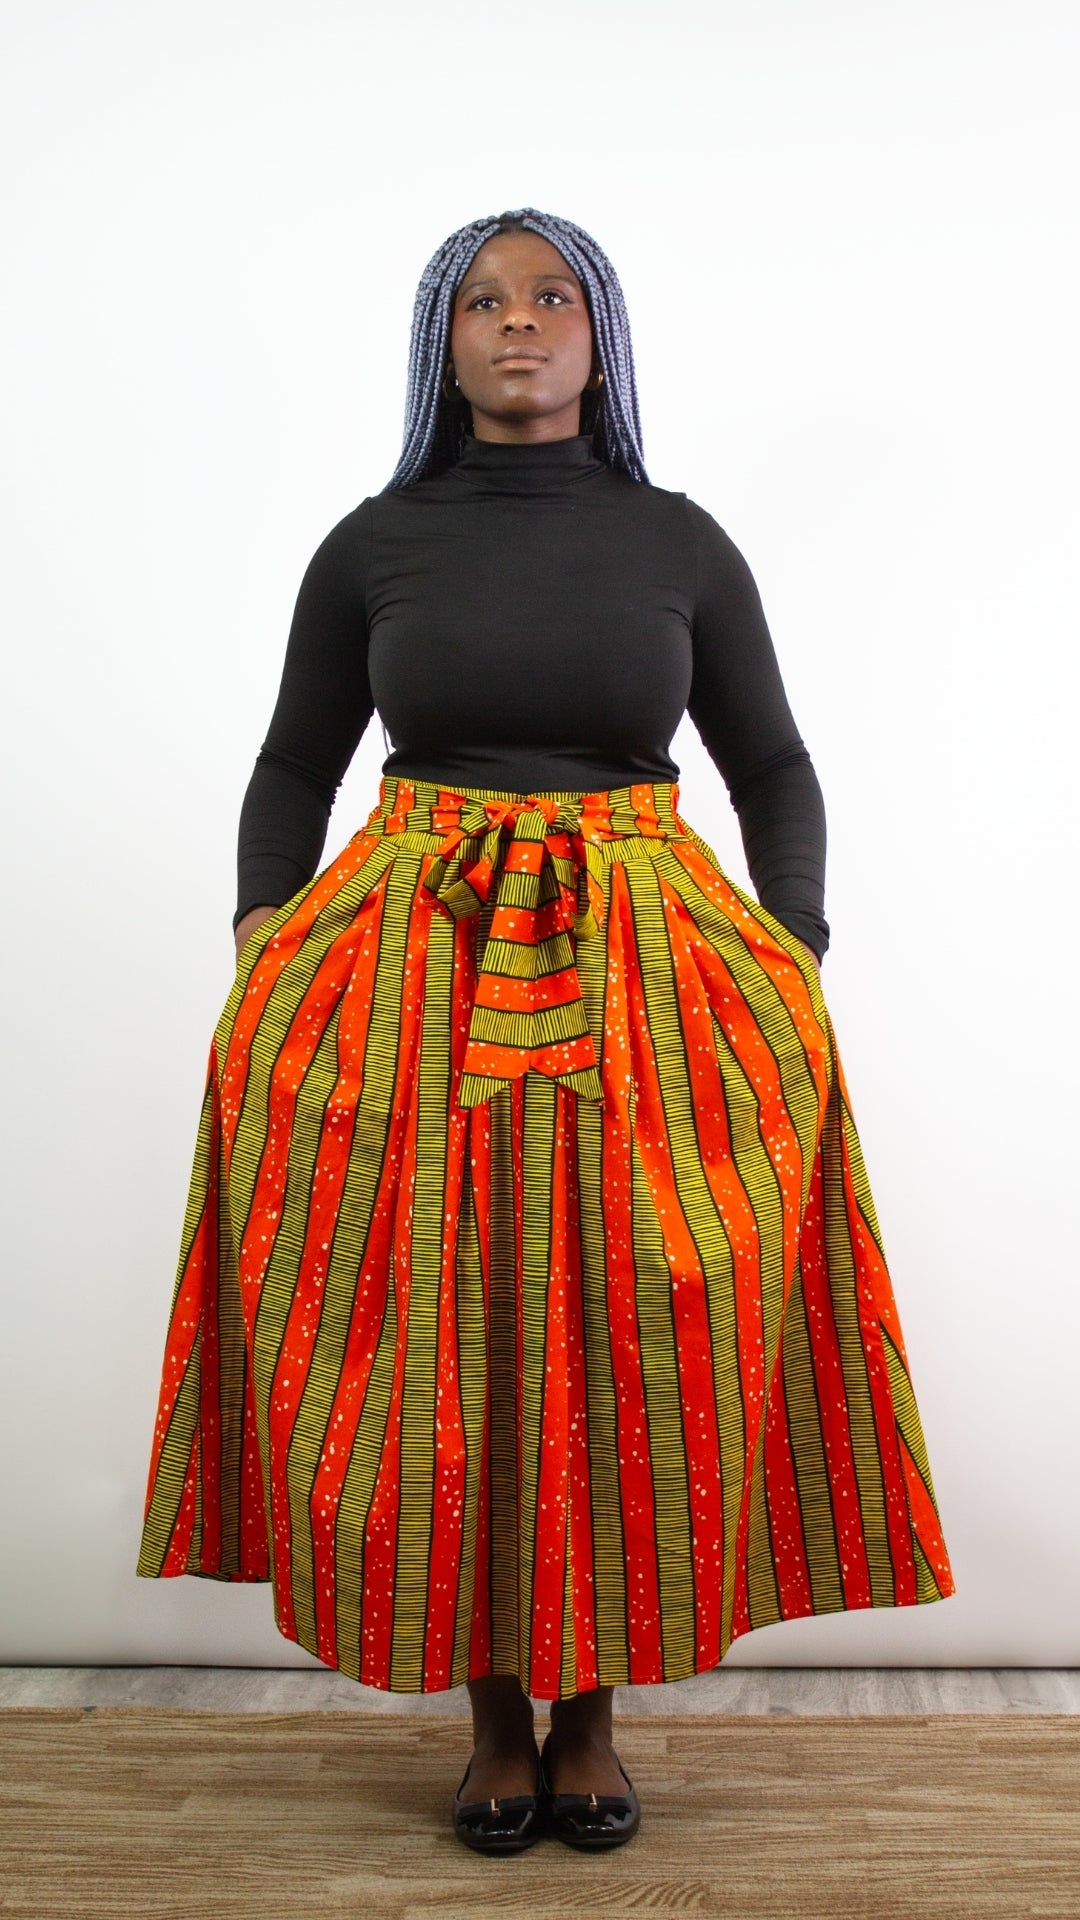 a full body portrait of a person posing in a long orange and yellow skirt with a tie belt, black top and black ballet shoes